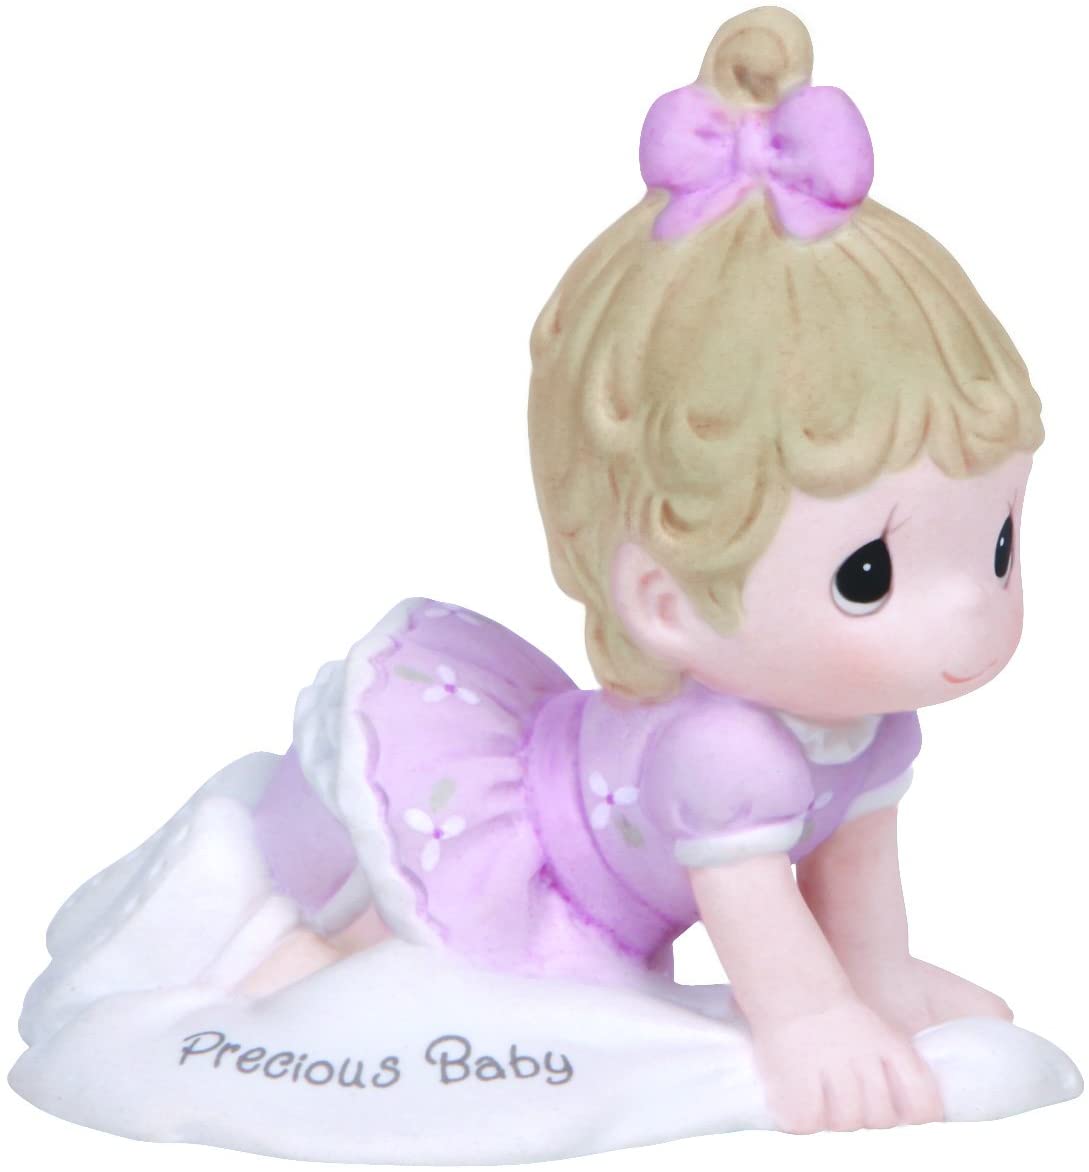 Growing In Grace, Precious Baby, Bisque Porcelain Figurine